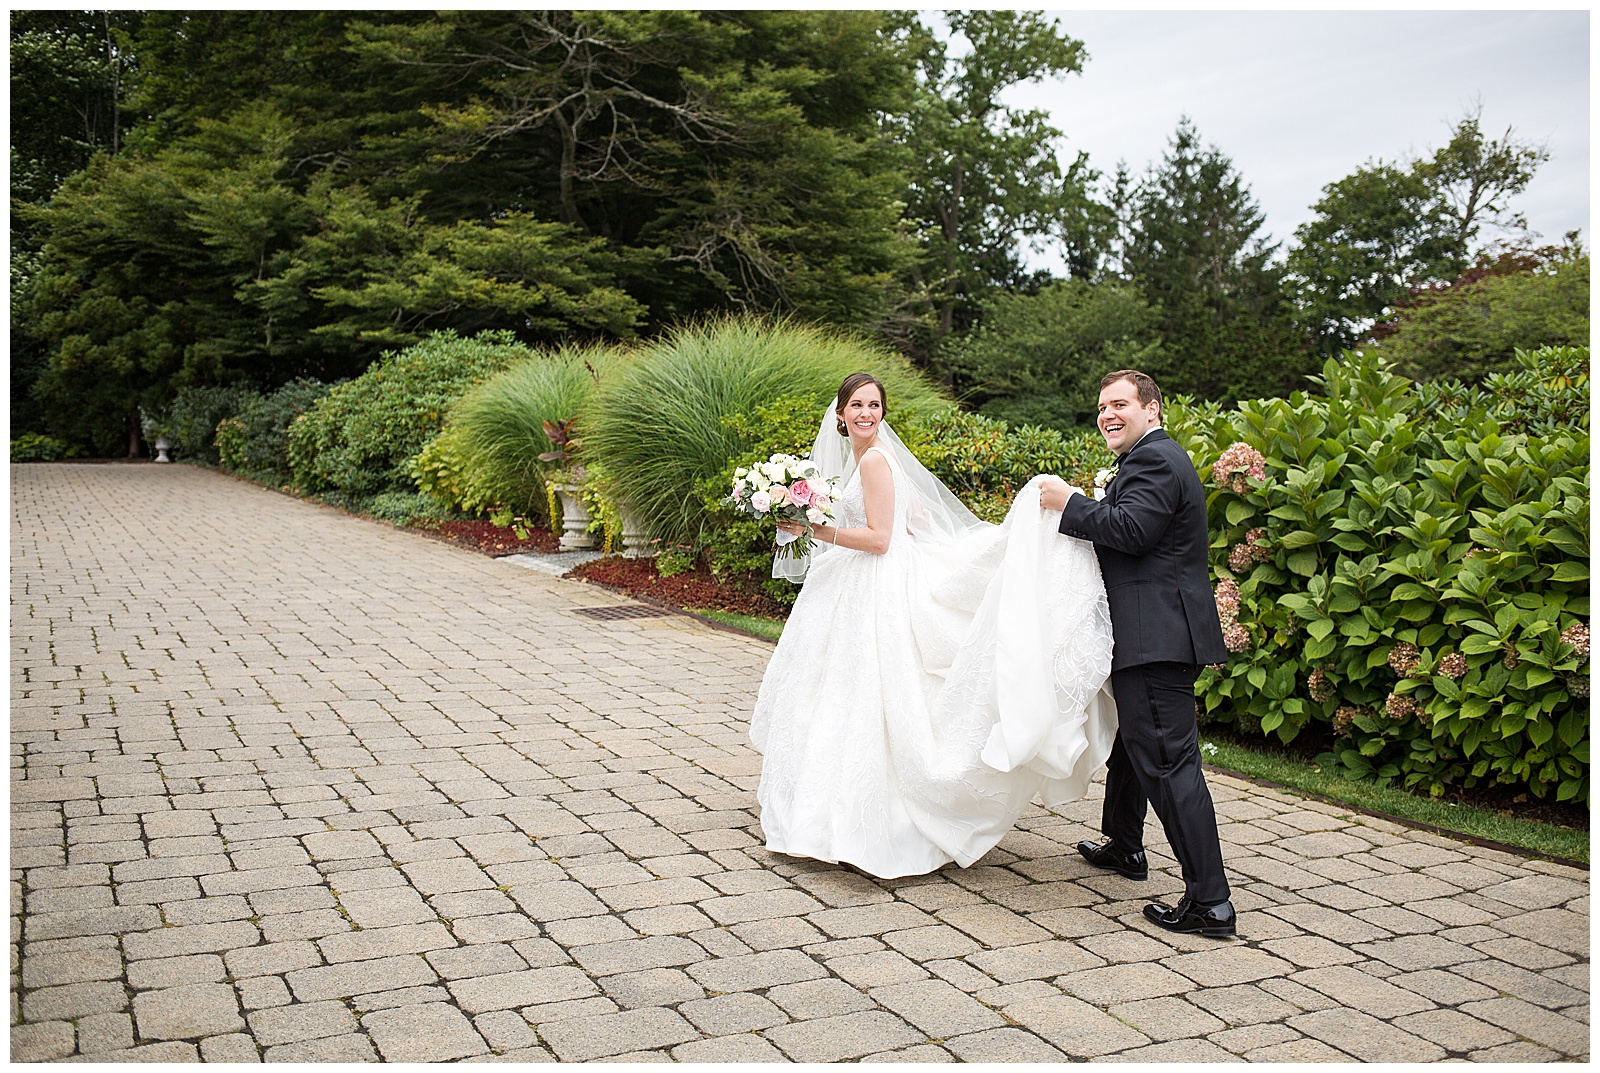 Bride and Groom share a laugh walking up the path at the Chanler